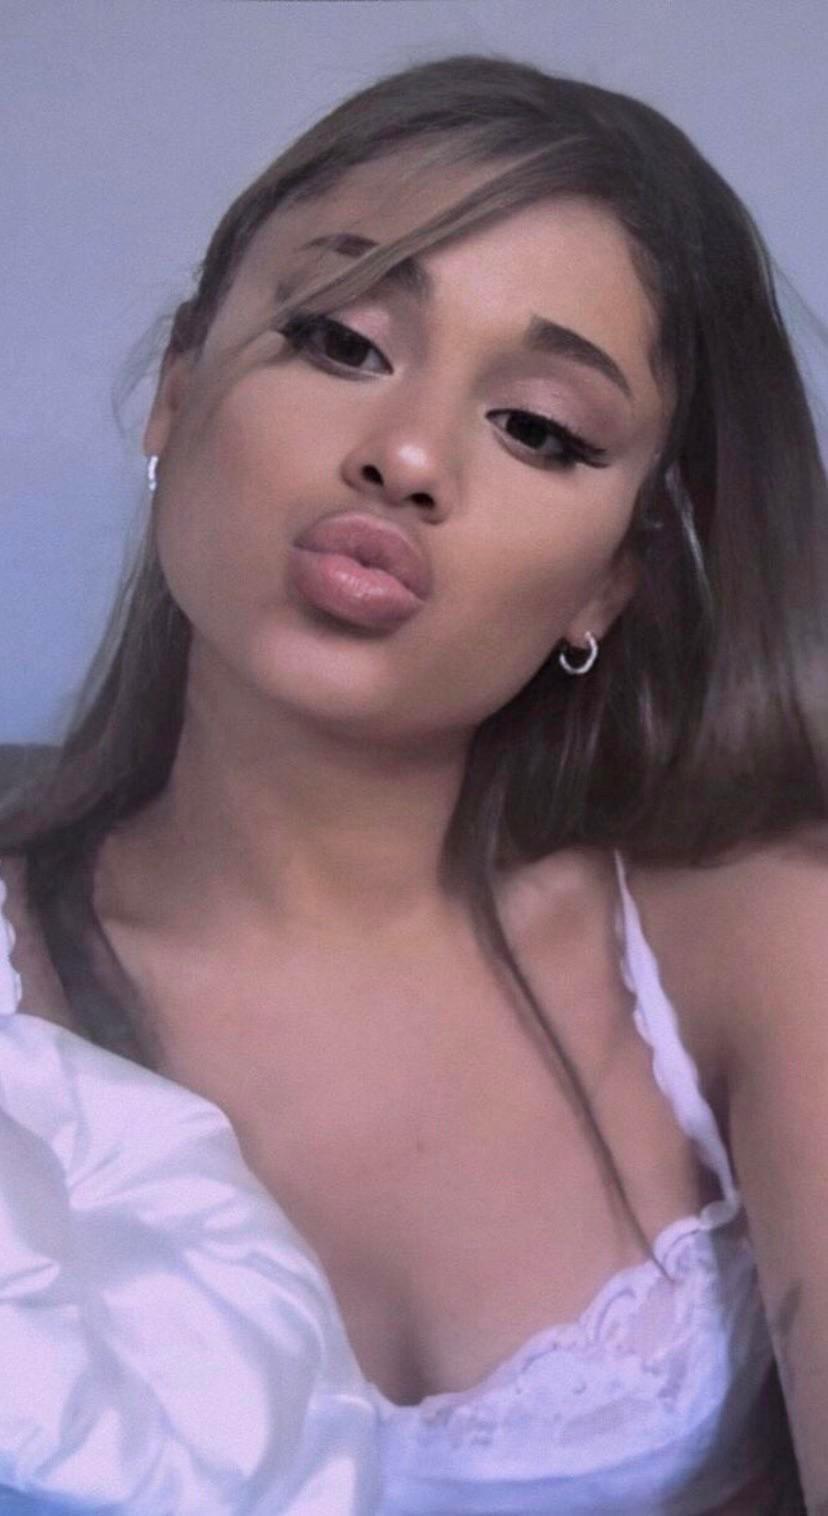 Just cant get enough of celebrity DSLs like Ariana Grandes